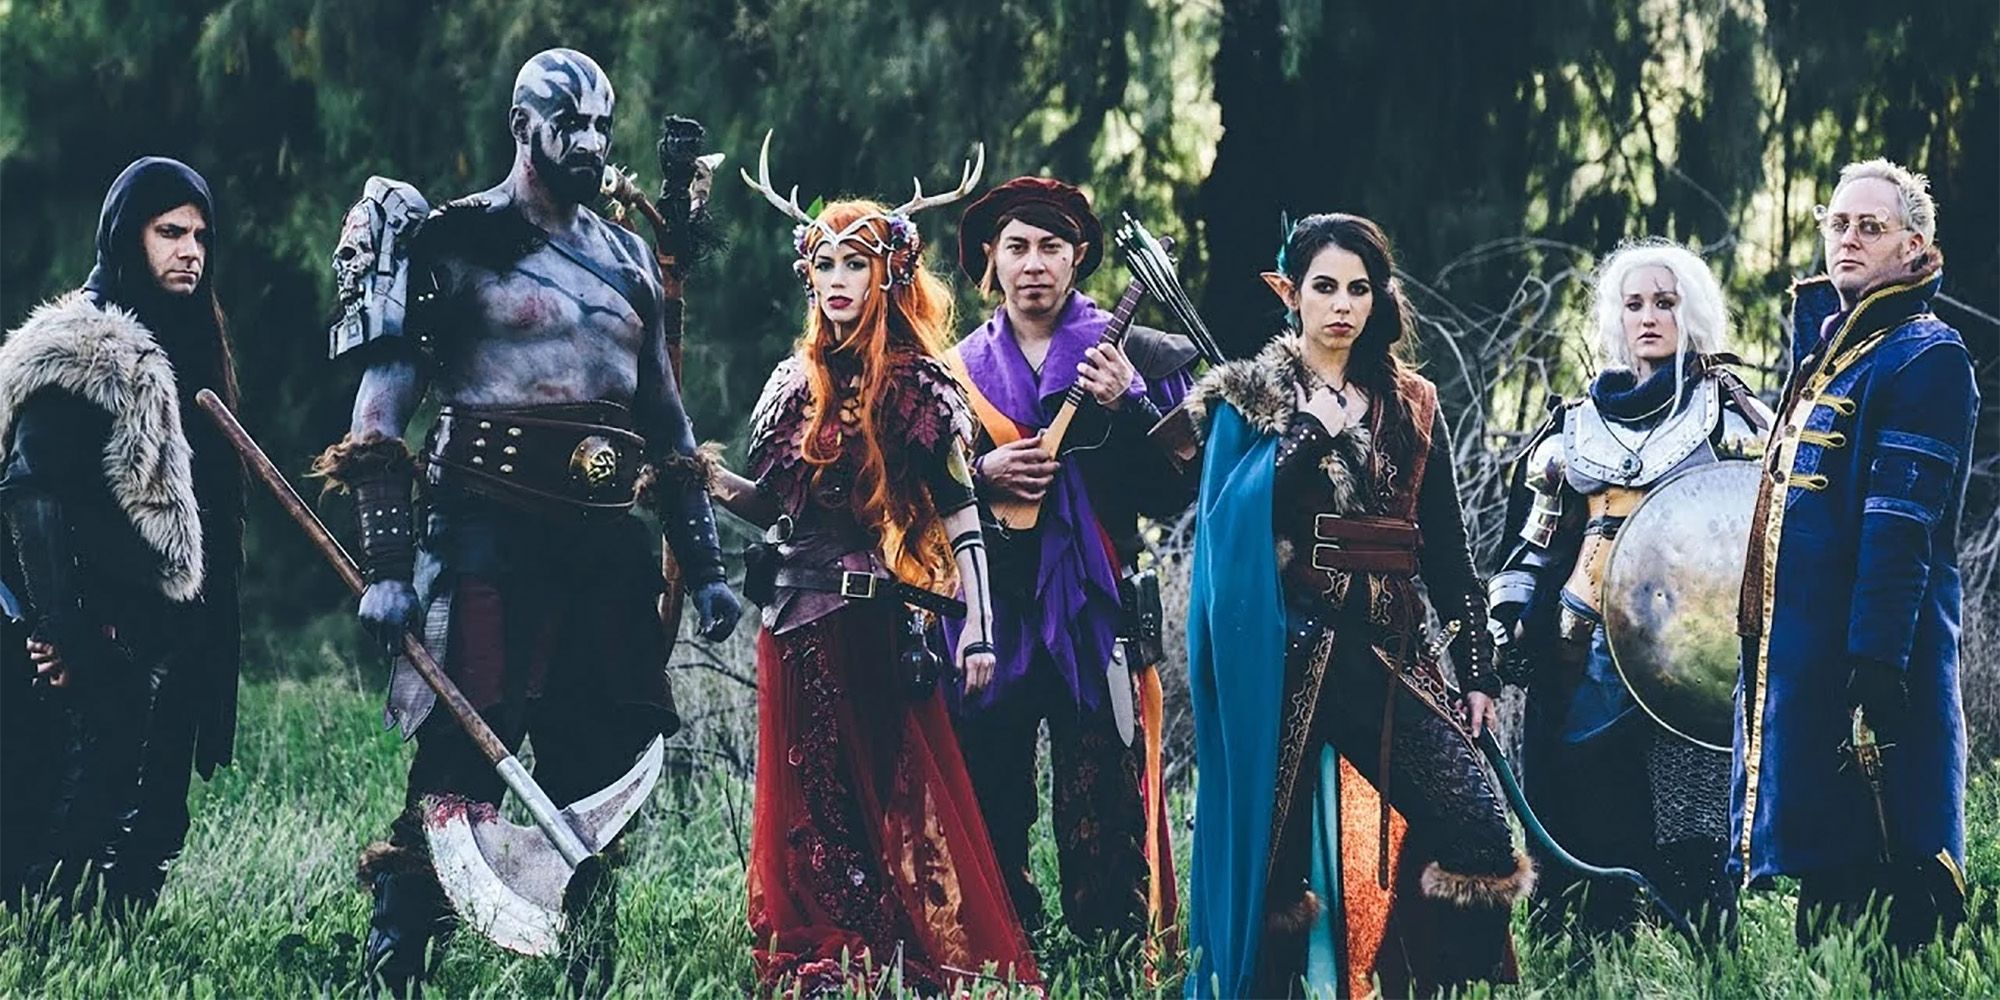 The cast of Critical Role dressed as their Vox Machina characters